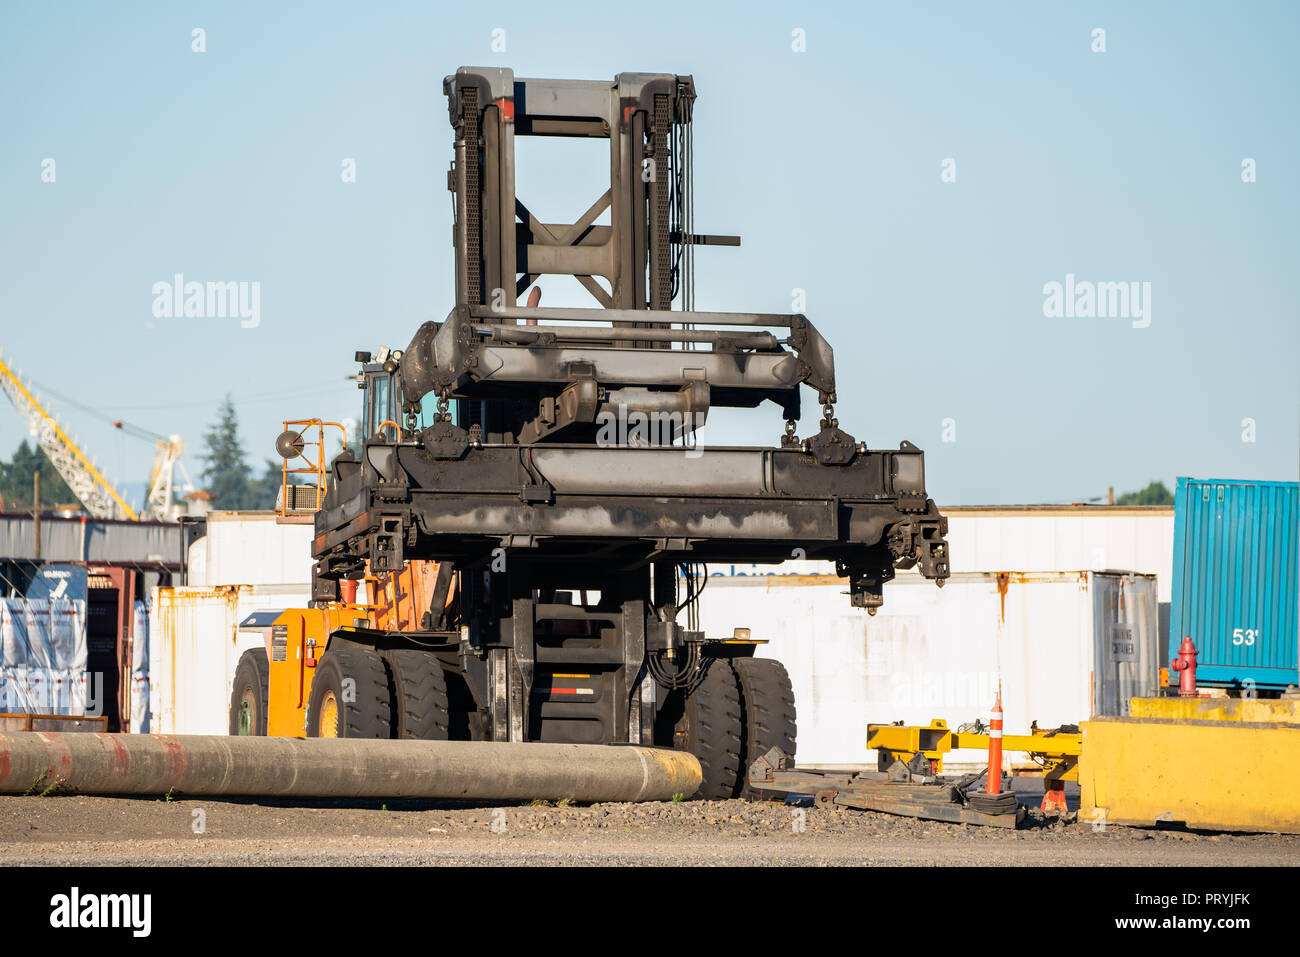 Portland Or Usa June 26 2018 Container Unloading Equipment Forklift At The Train Station In The Industrial Setting Stock Photo Alamy